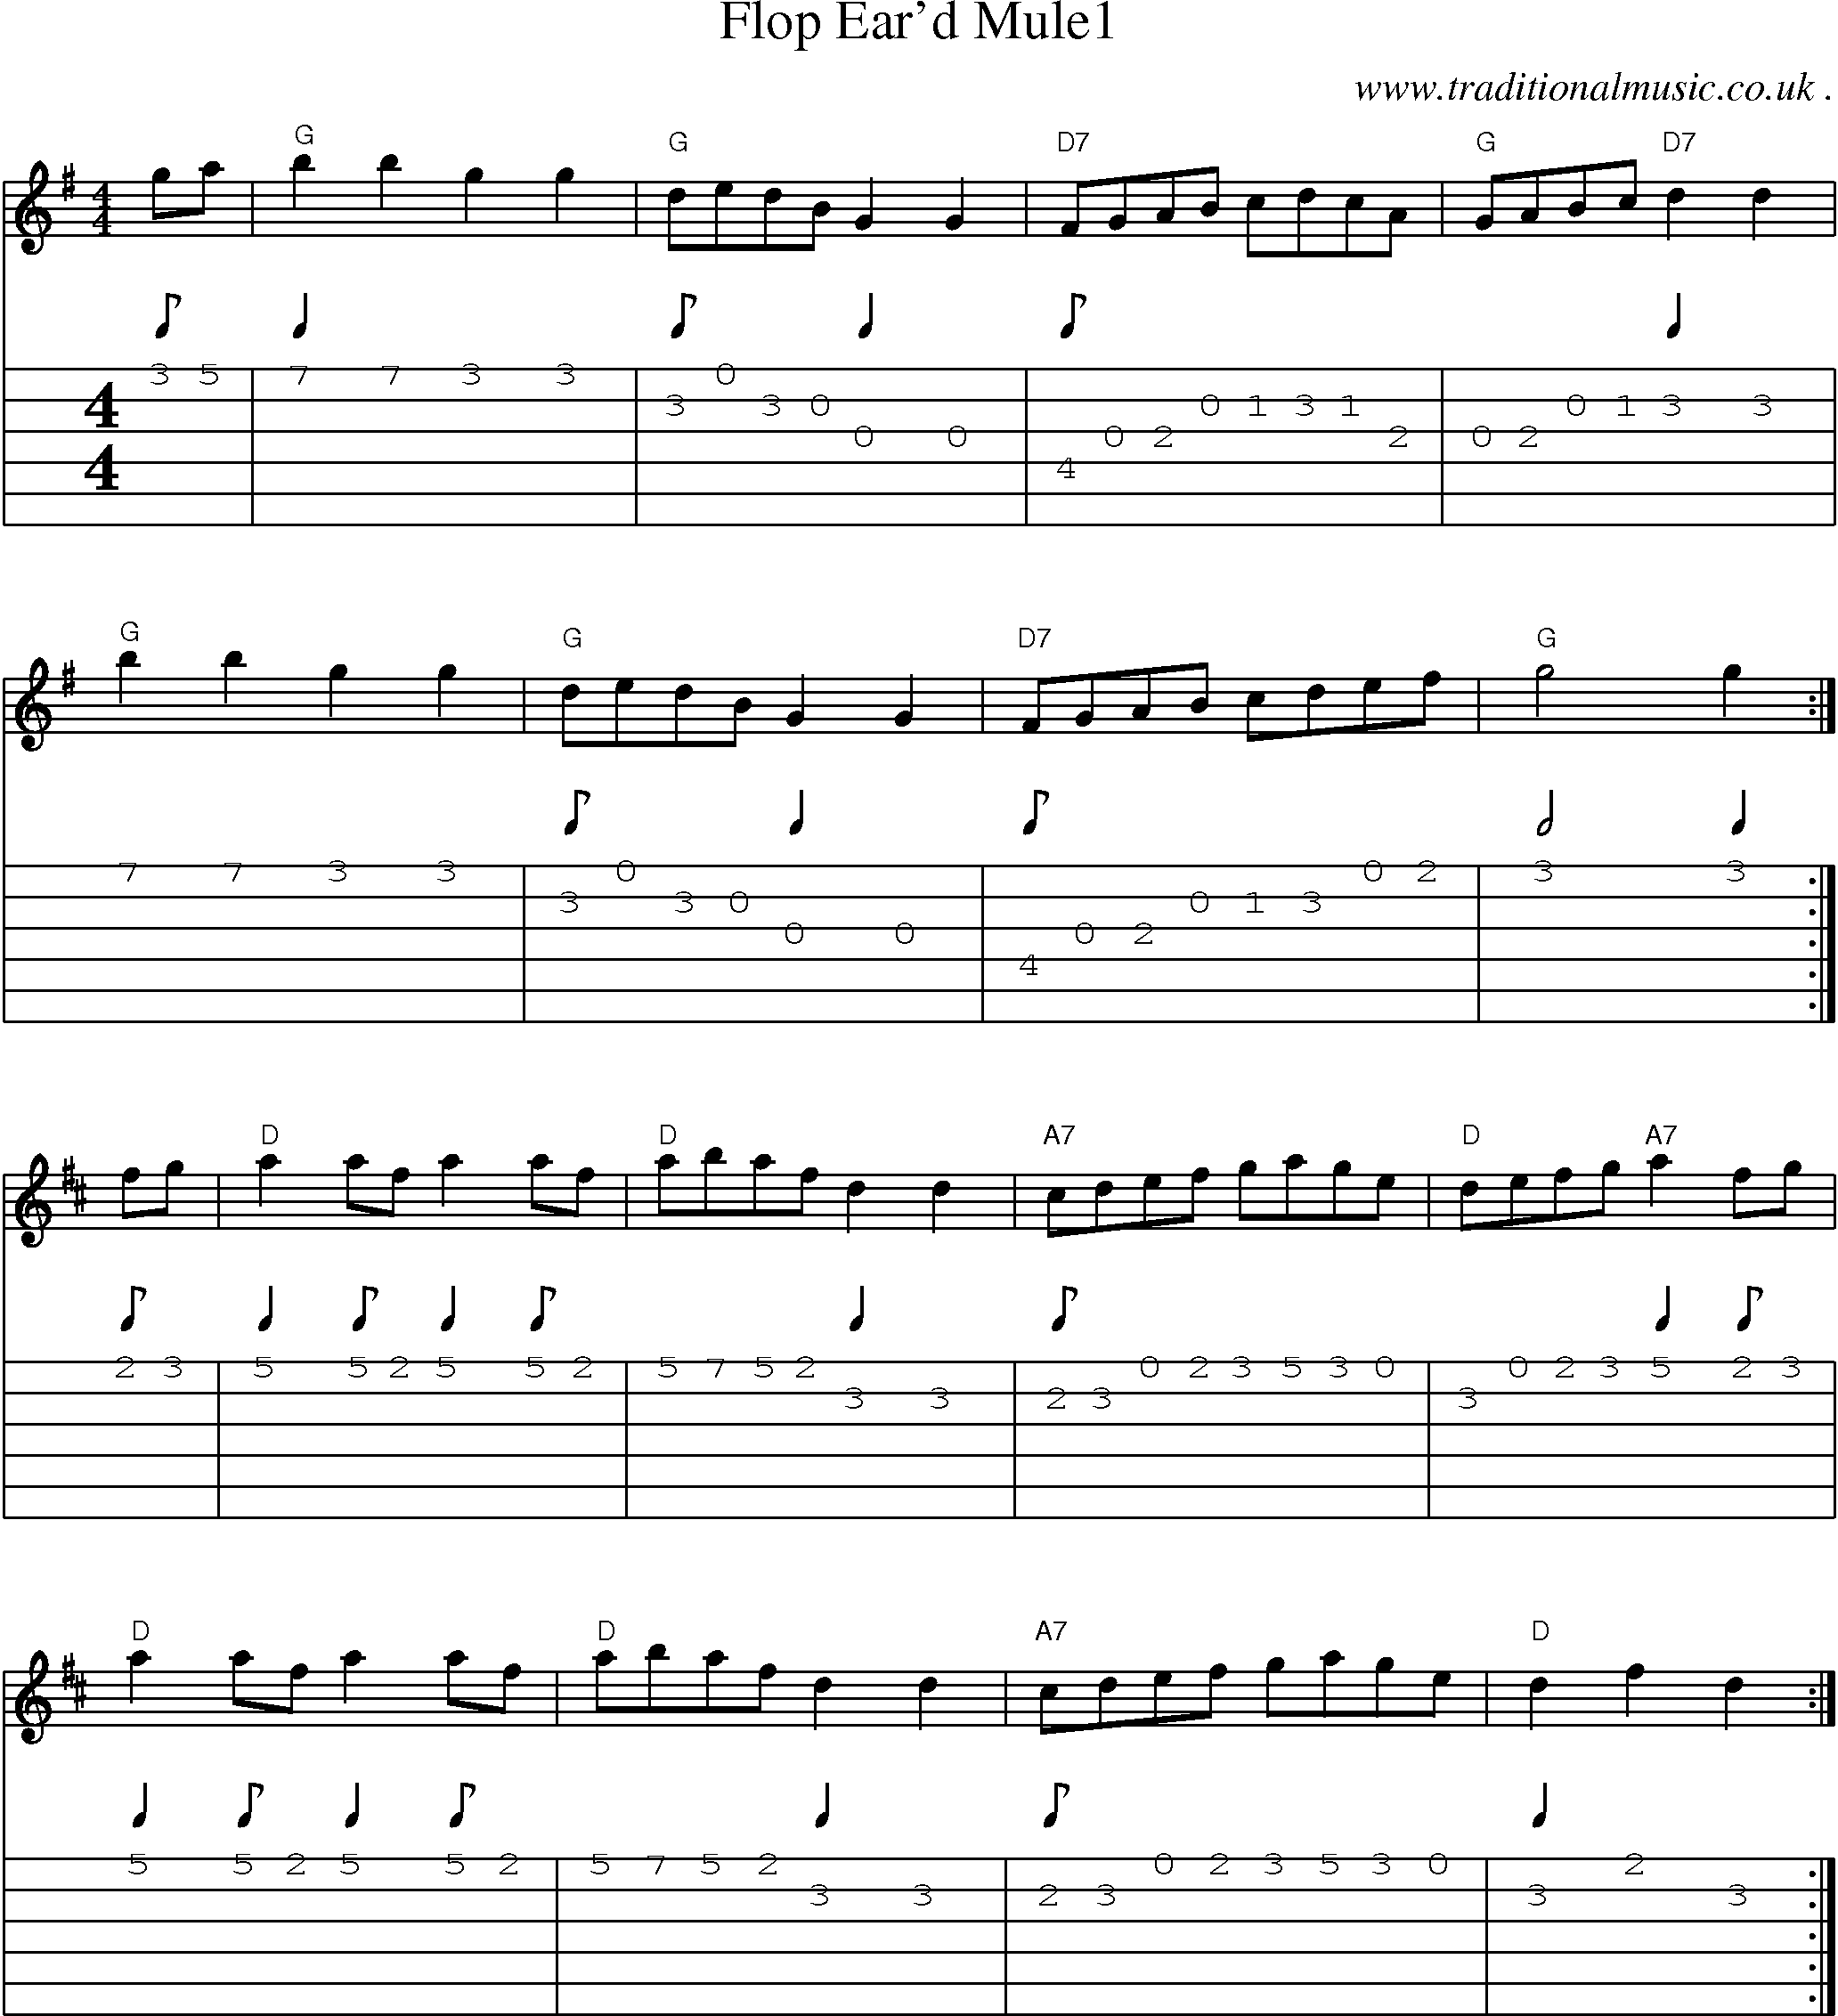 Music Score and Guitar Tabs for Flop Eard Mule1